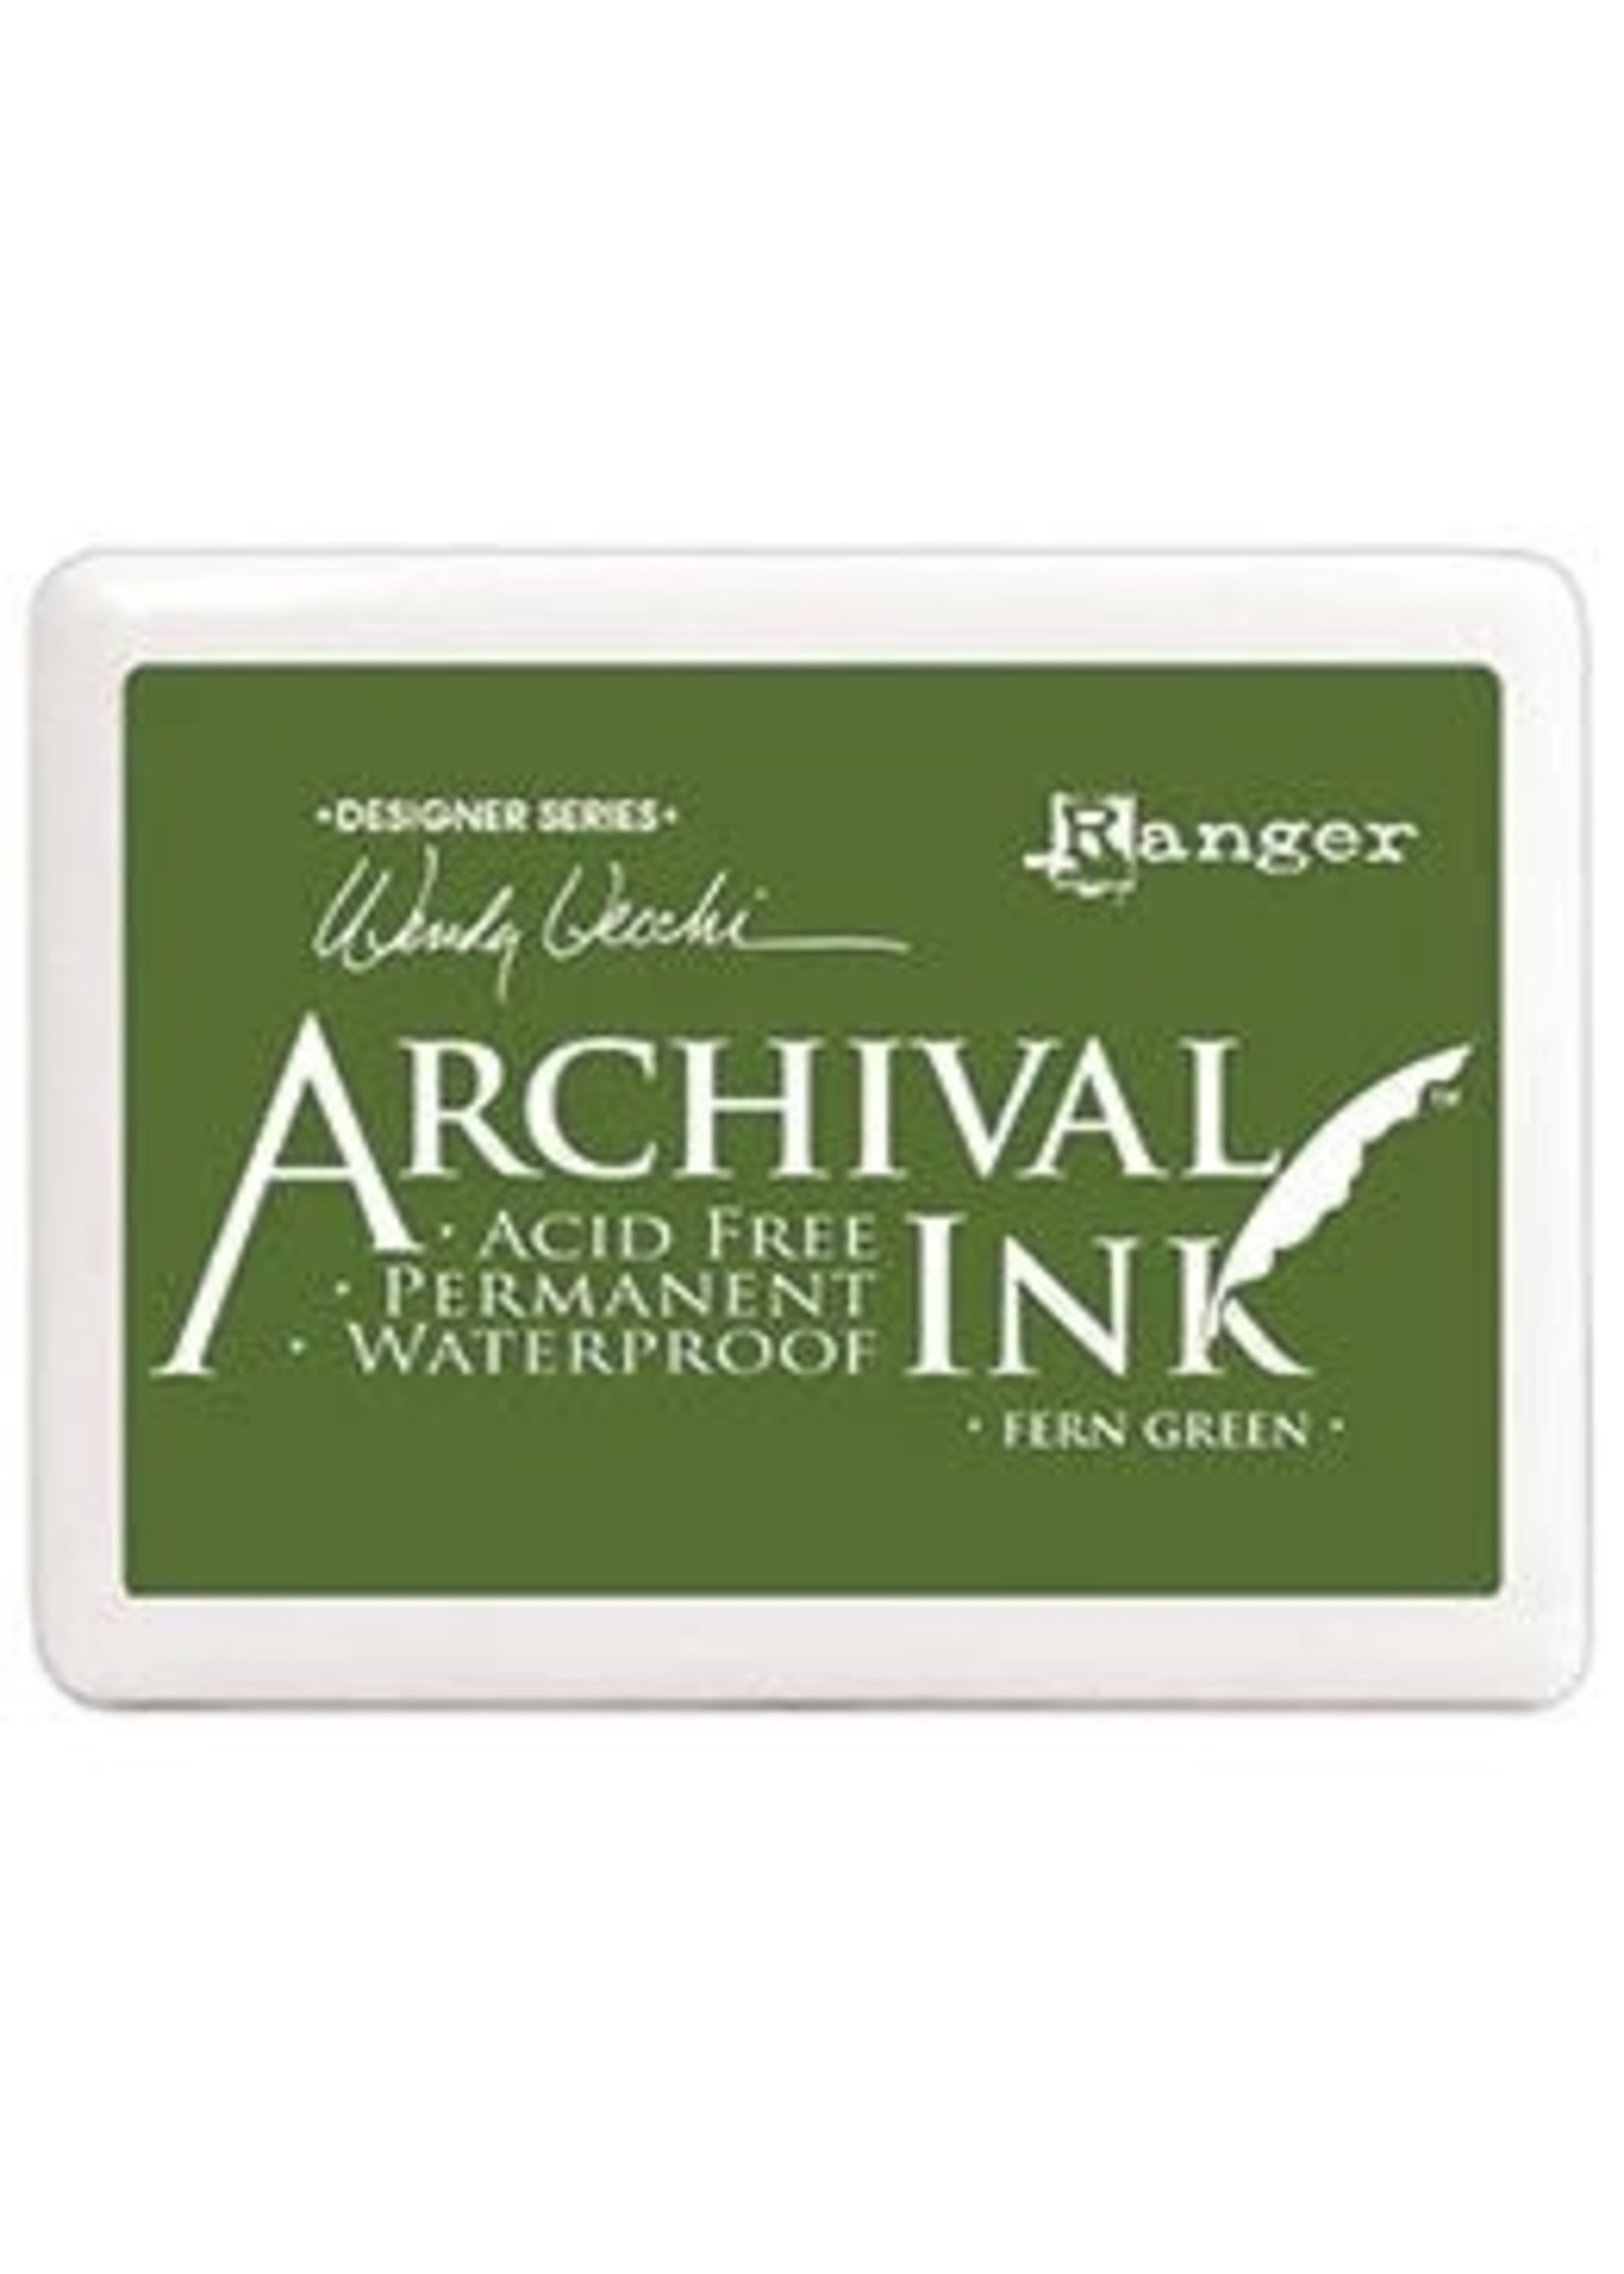 Ranger Sap Green Archival Ink Pad – The Foiled Fox